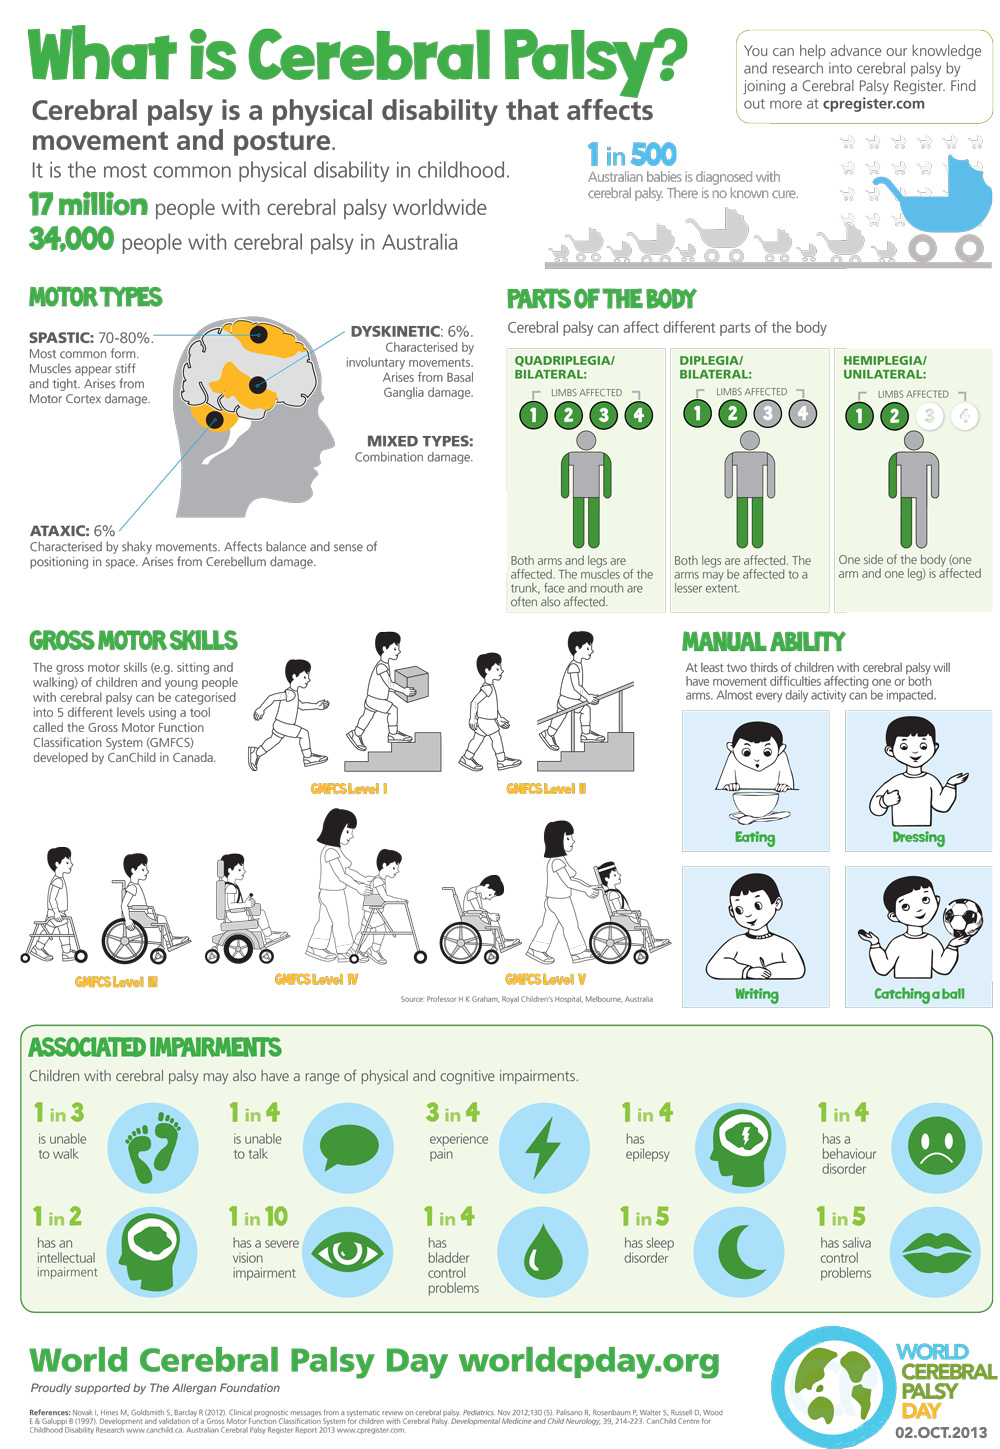 Cerebral Palsy Facts and Statistics